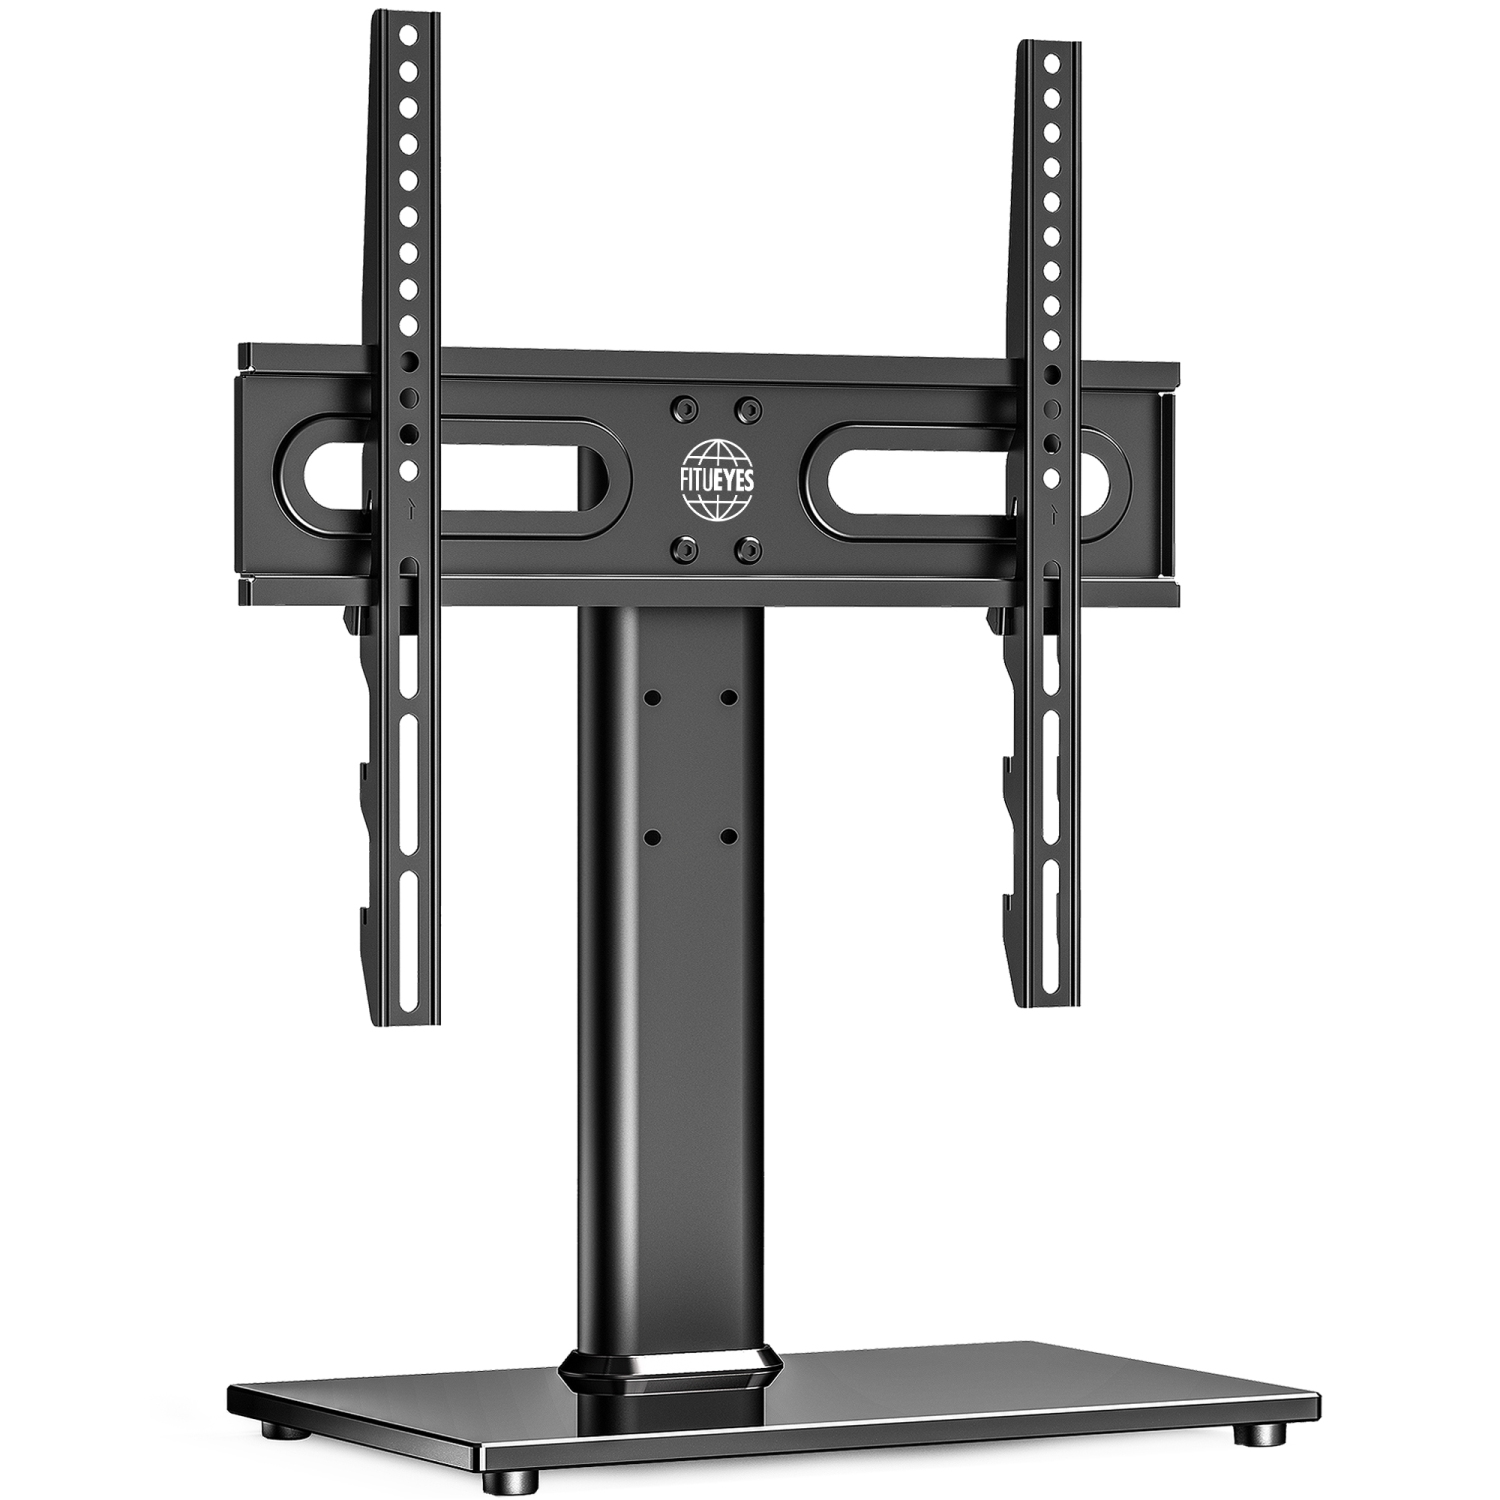 FITUEYES TV Stand / Base Tabletop TV Stand with Mount for most 27 - 55 inch Flat Screen TV Components Max VESA 400x400